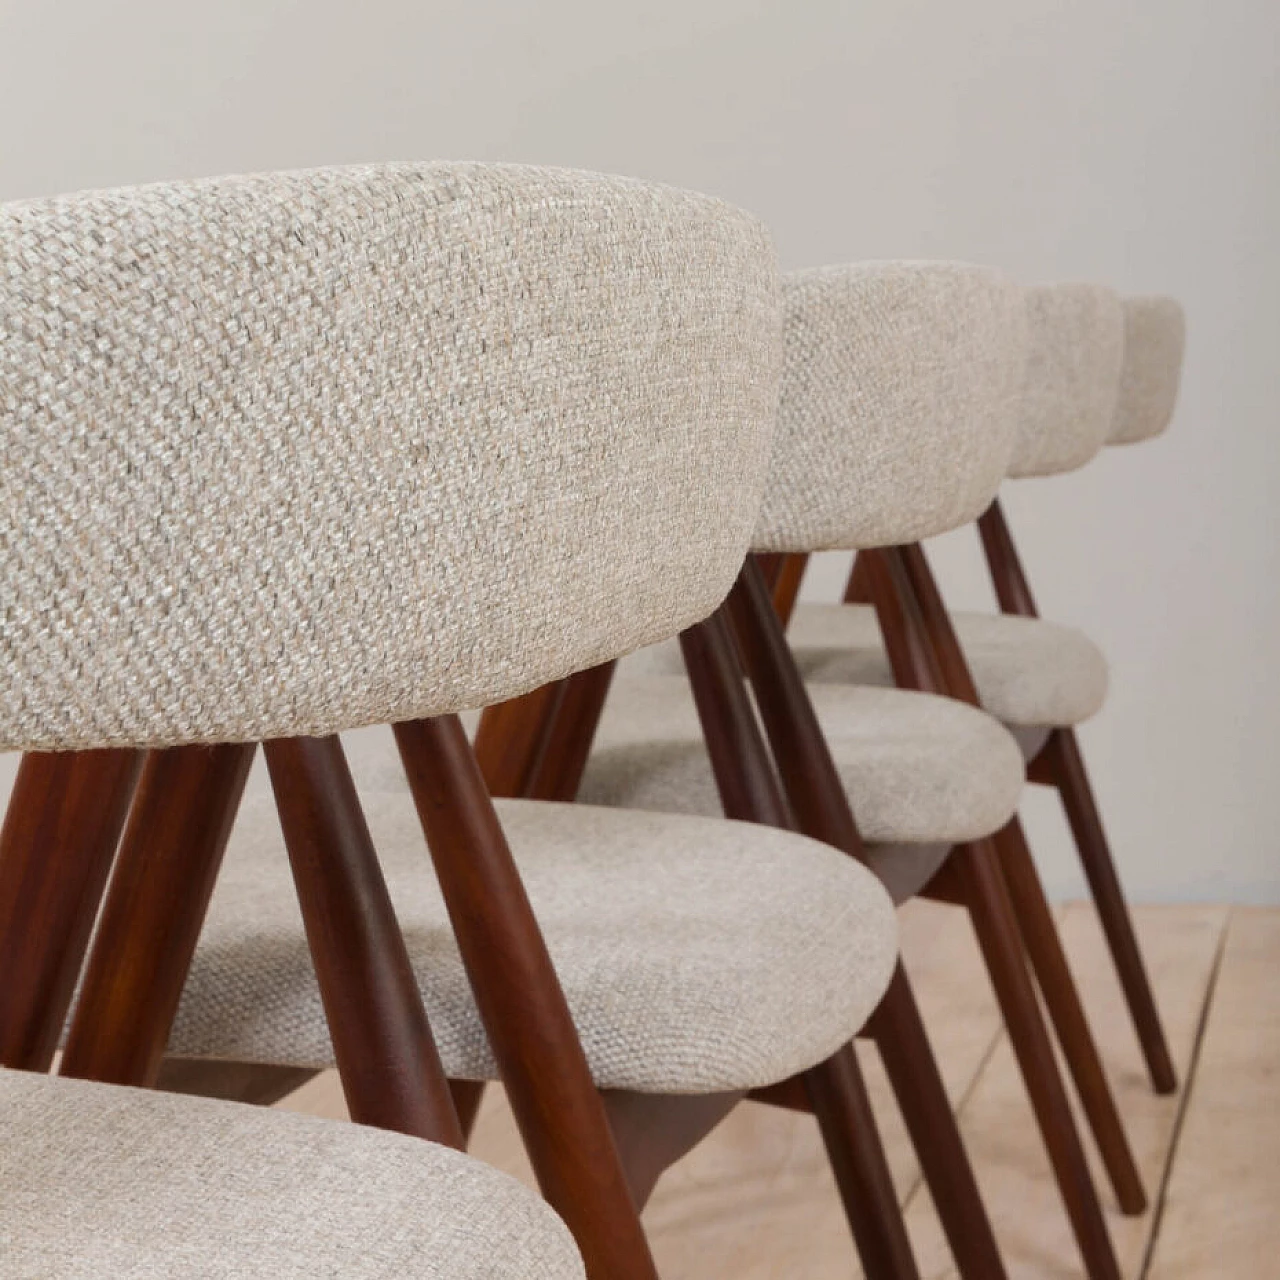 4 Teak and beige wool chairs by Thomas Harlev for Farstrup Møbler, 1950s 4